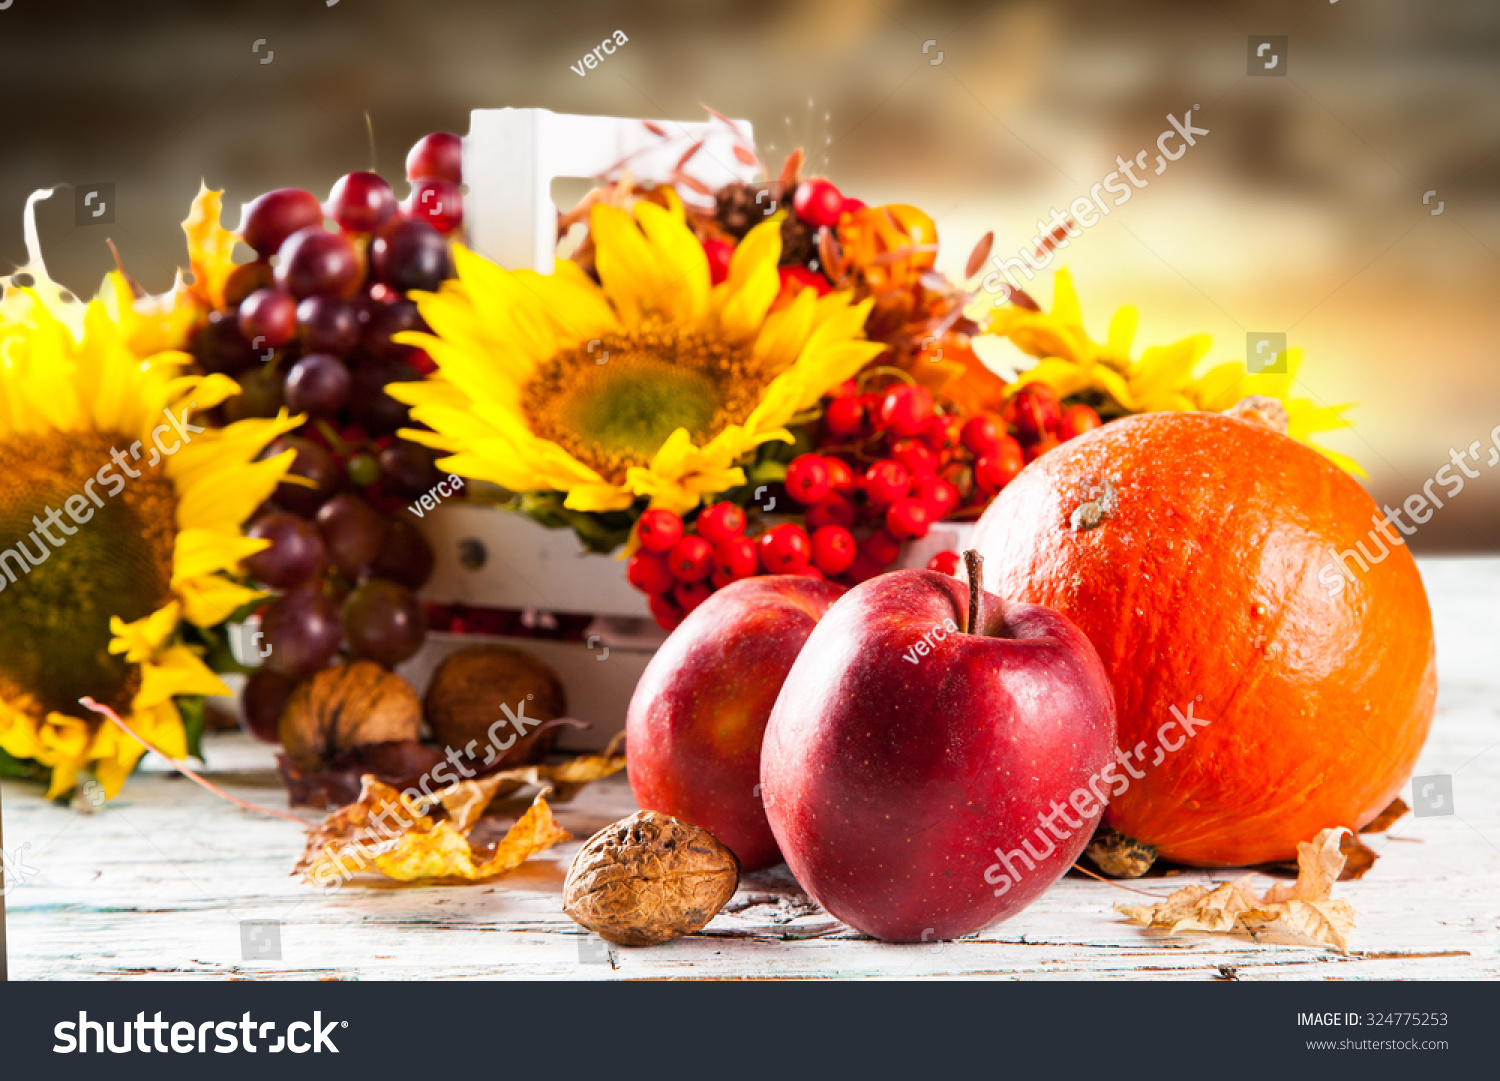 Autumn nature concept. Fall fruit and vegetables on wooden table #324775253